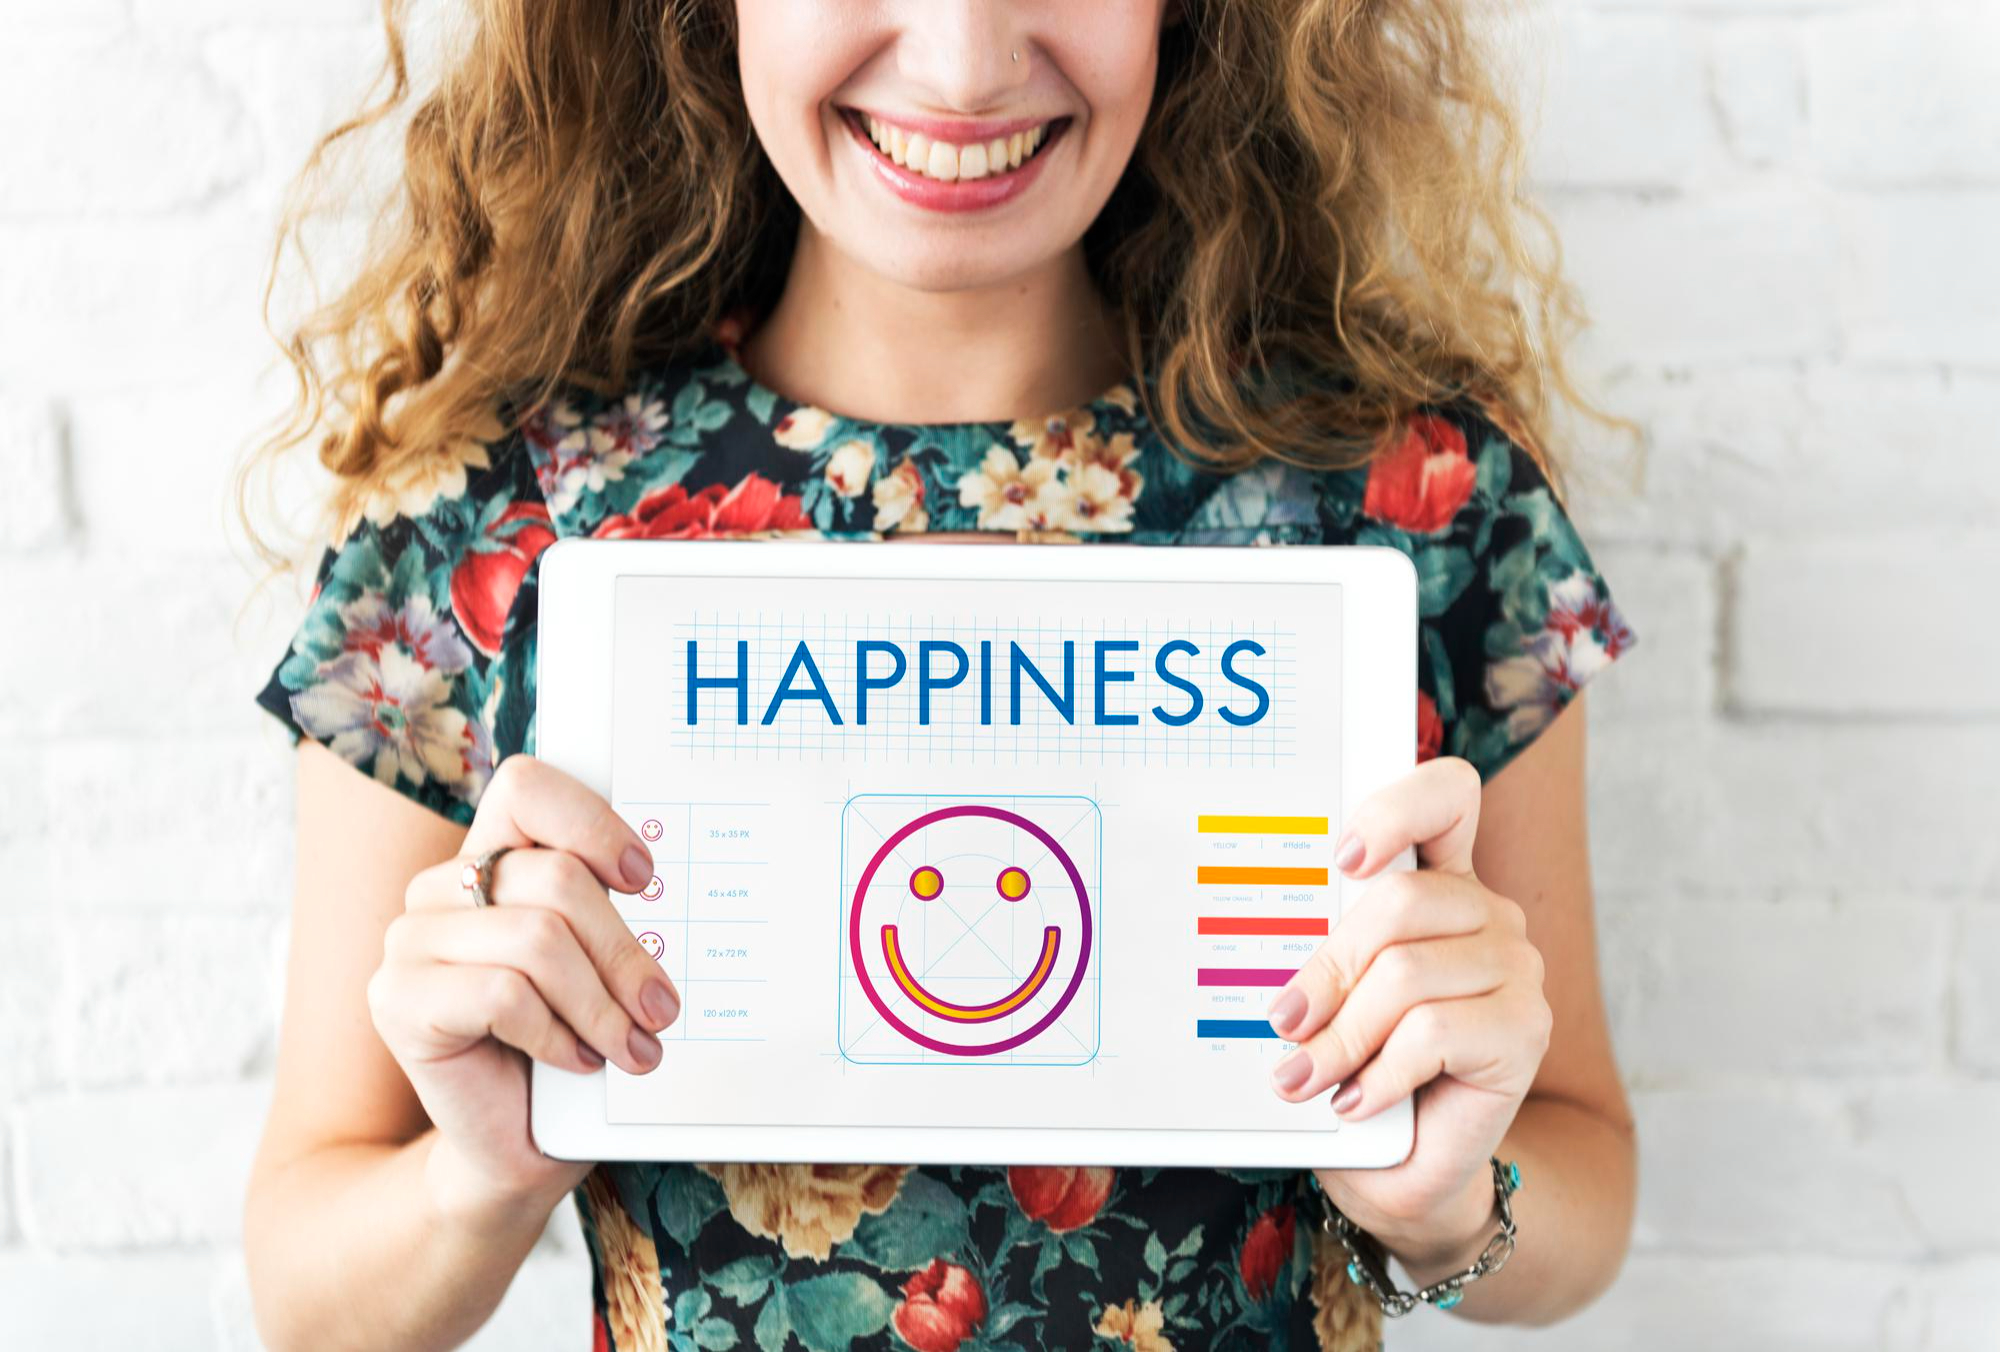 Training positive thinking and happiness with use of apps for mental health